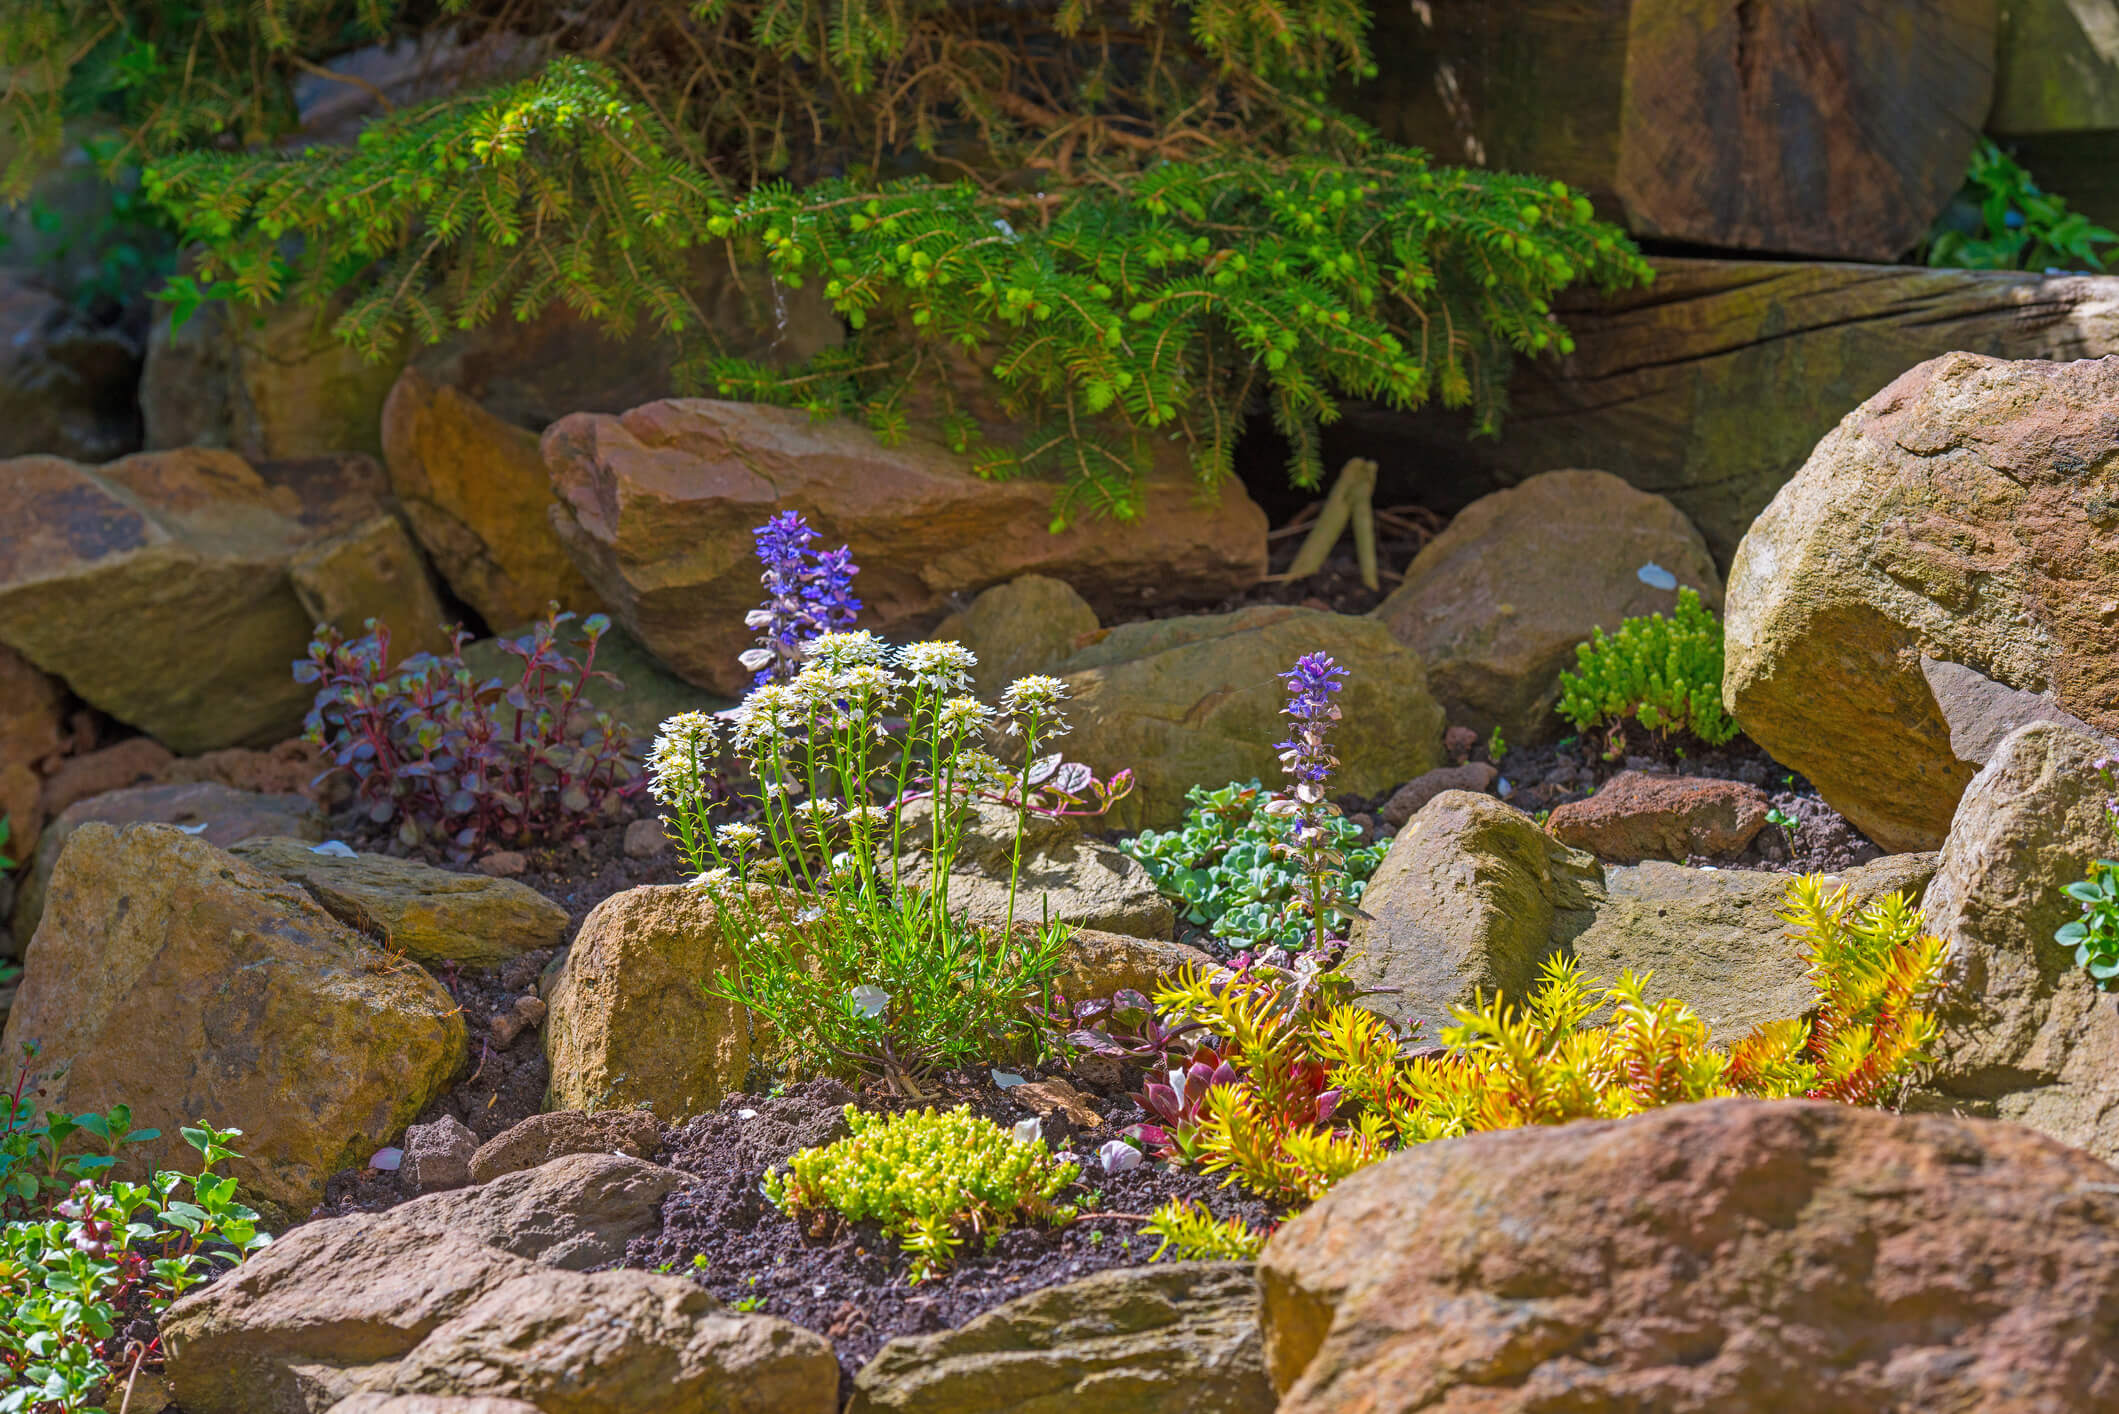 How To Build A Rock Garden On Slope